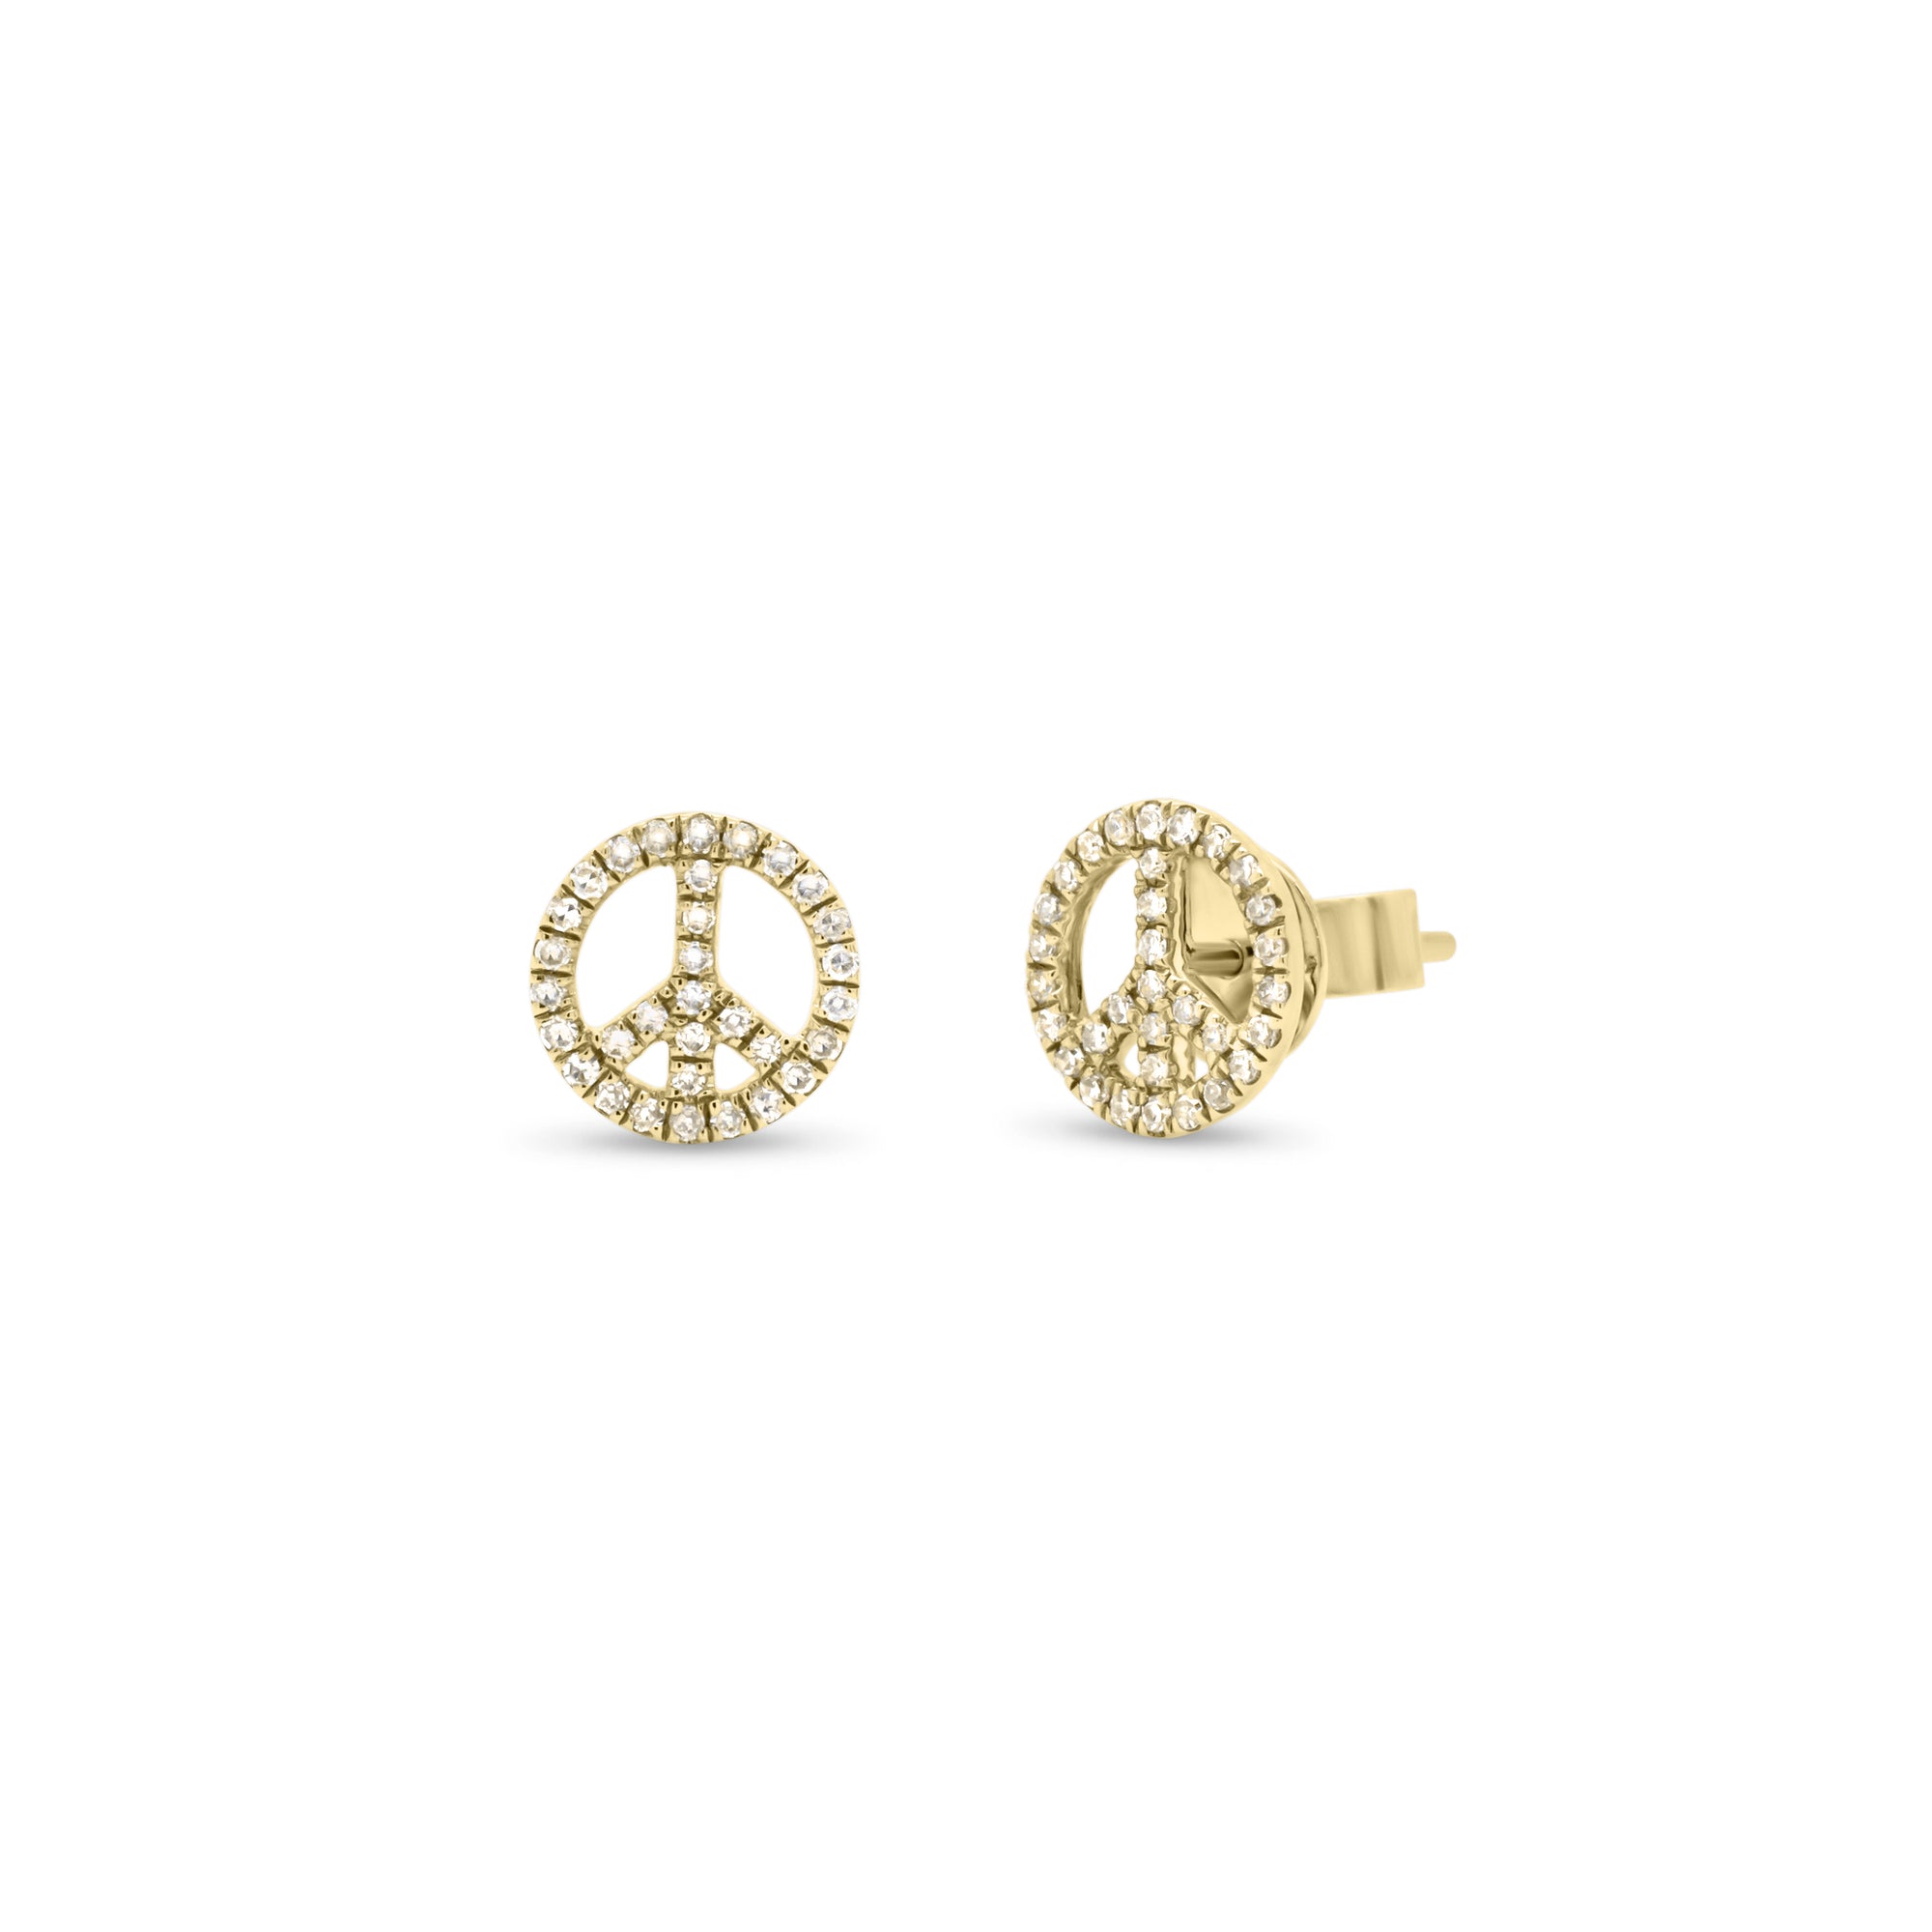 Diamond Peace Sign Stud Earrings -14K gold weighing 1.50 grams  -64 round diamonds weighing 0.17 carats